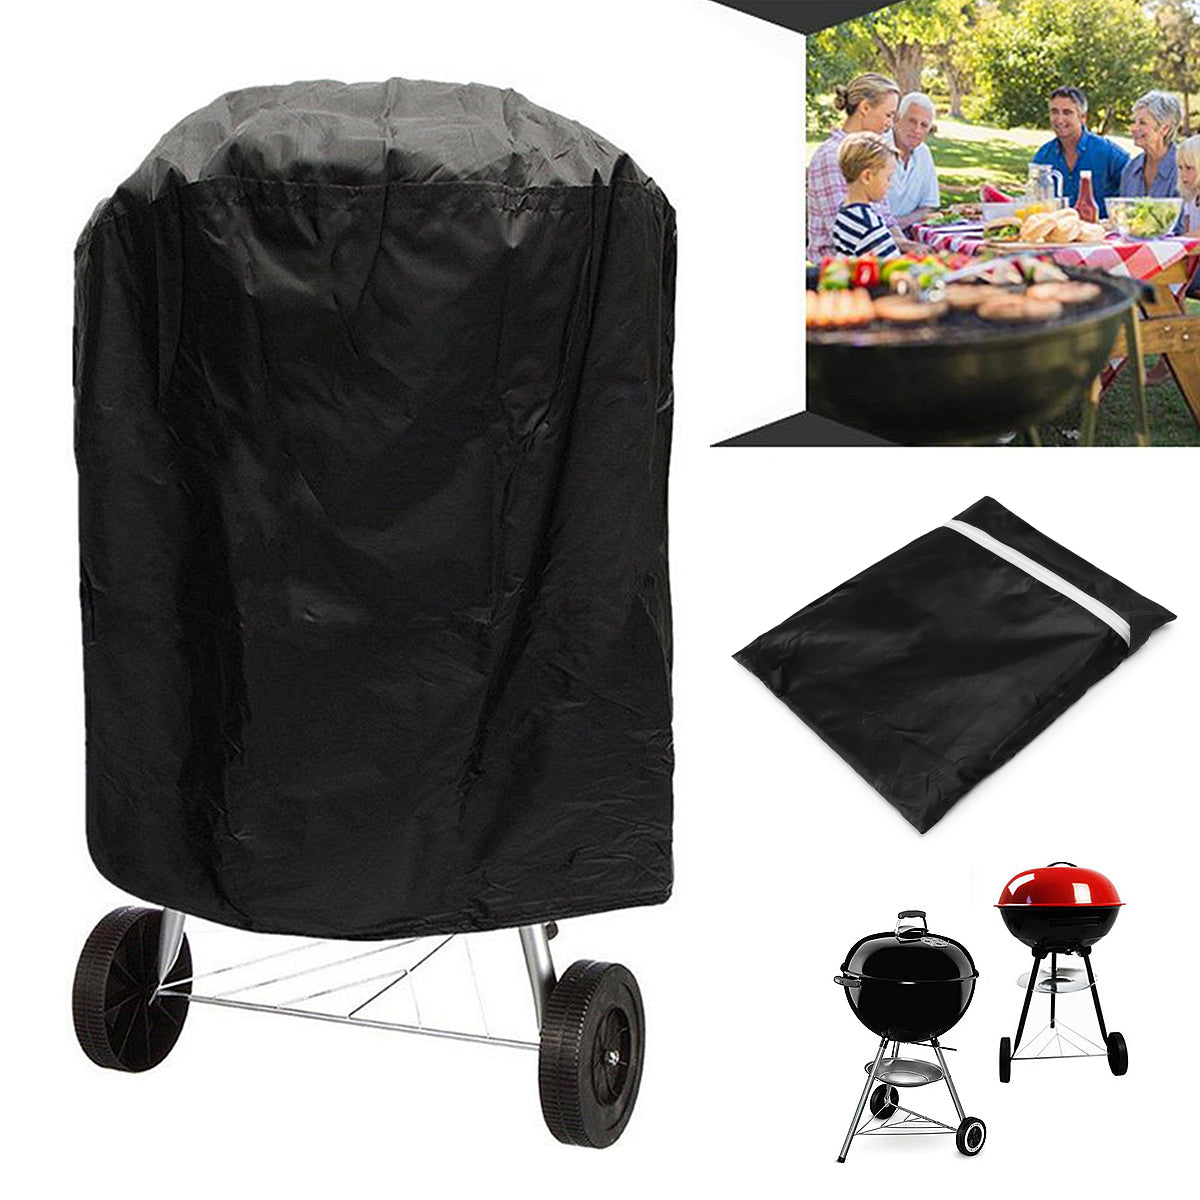 Outdoor Waterproof Round Kettle BBQ Grill Barbecue Cover Protector UV Resistant